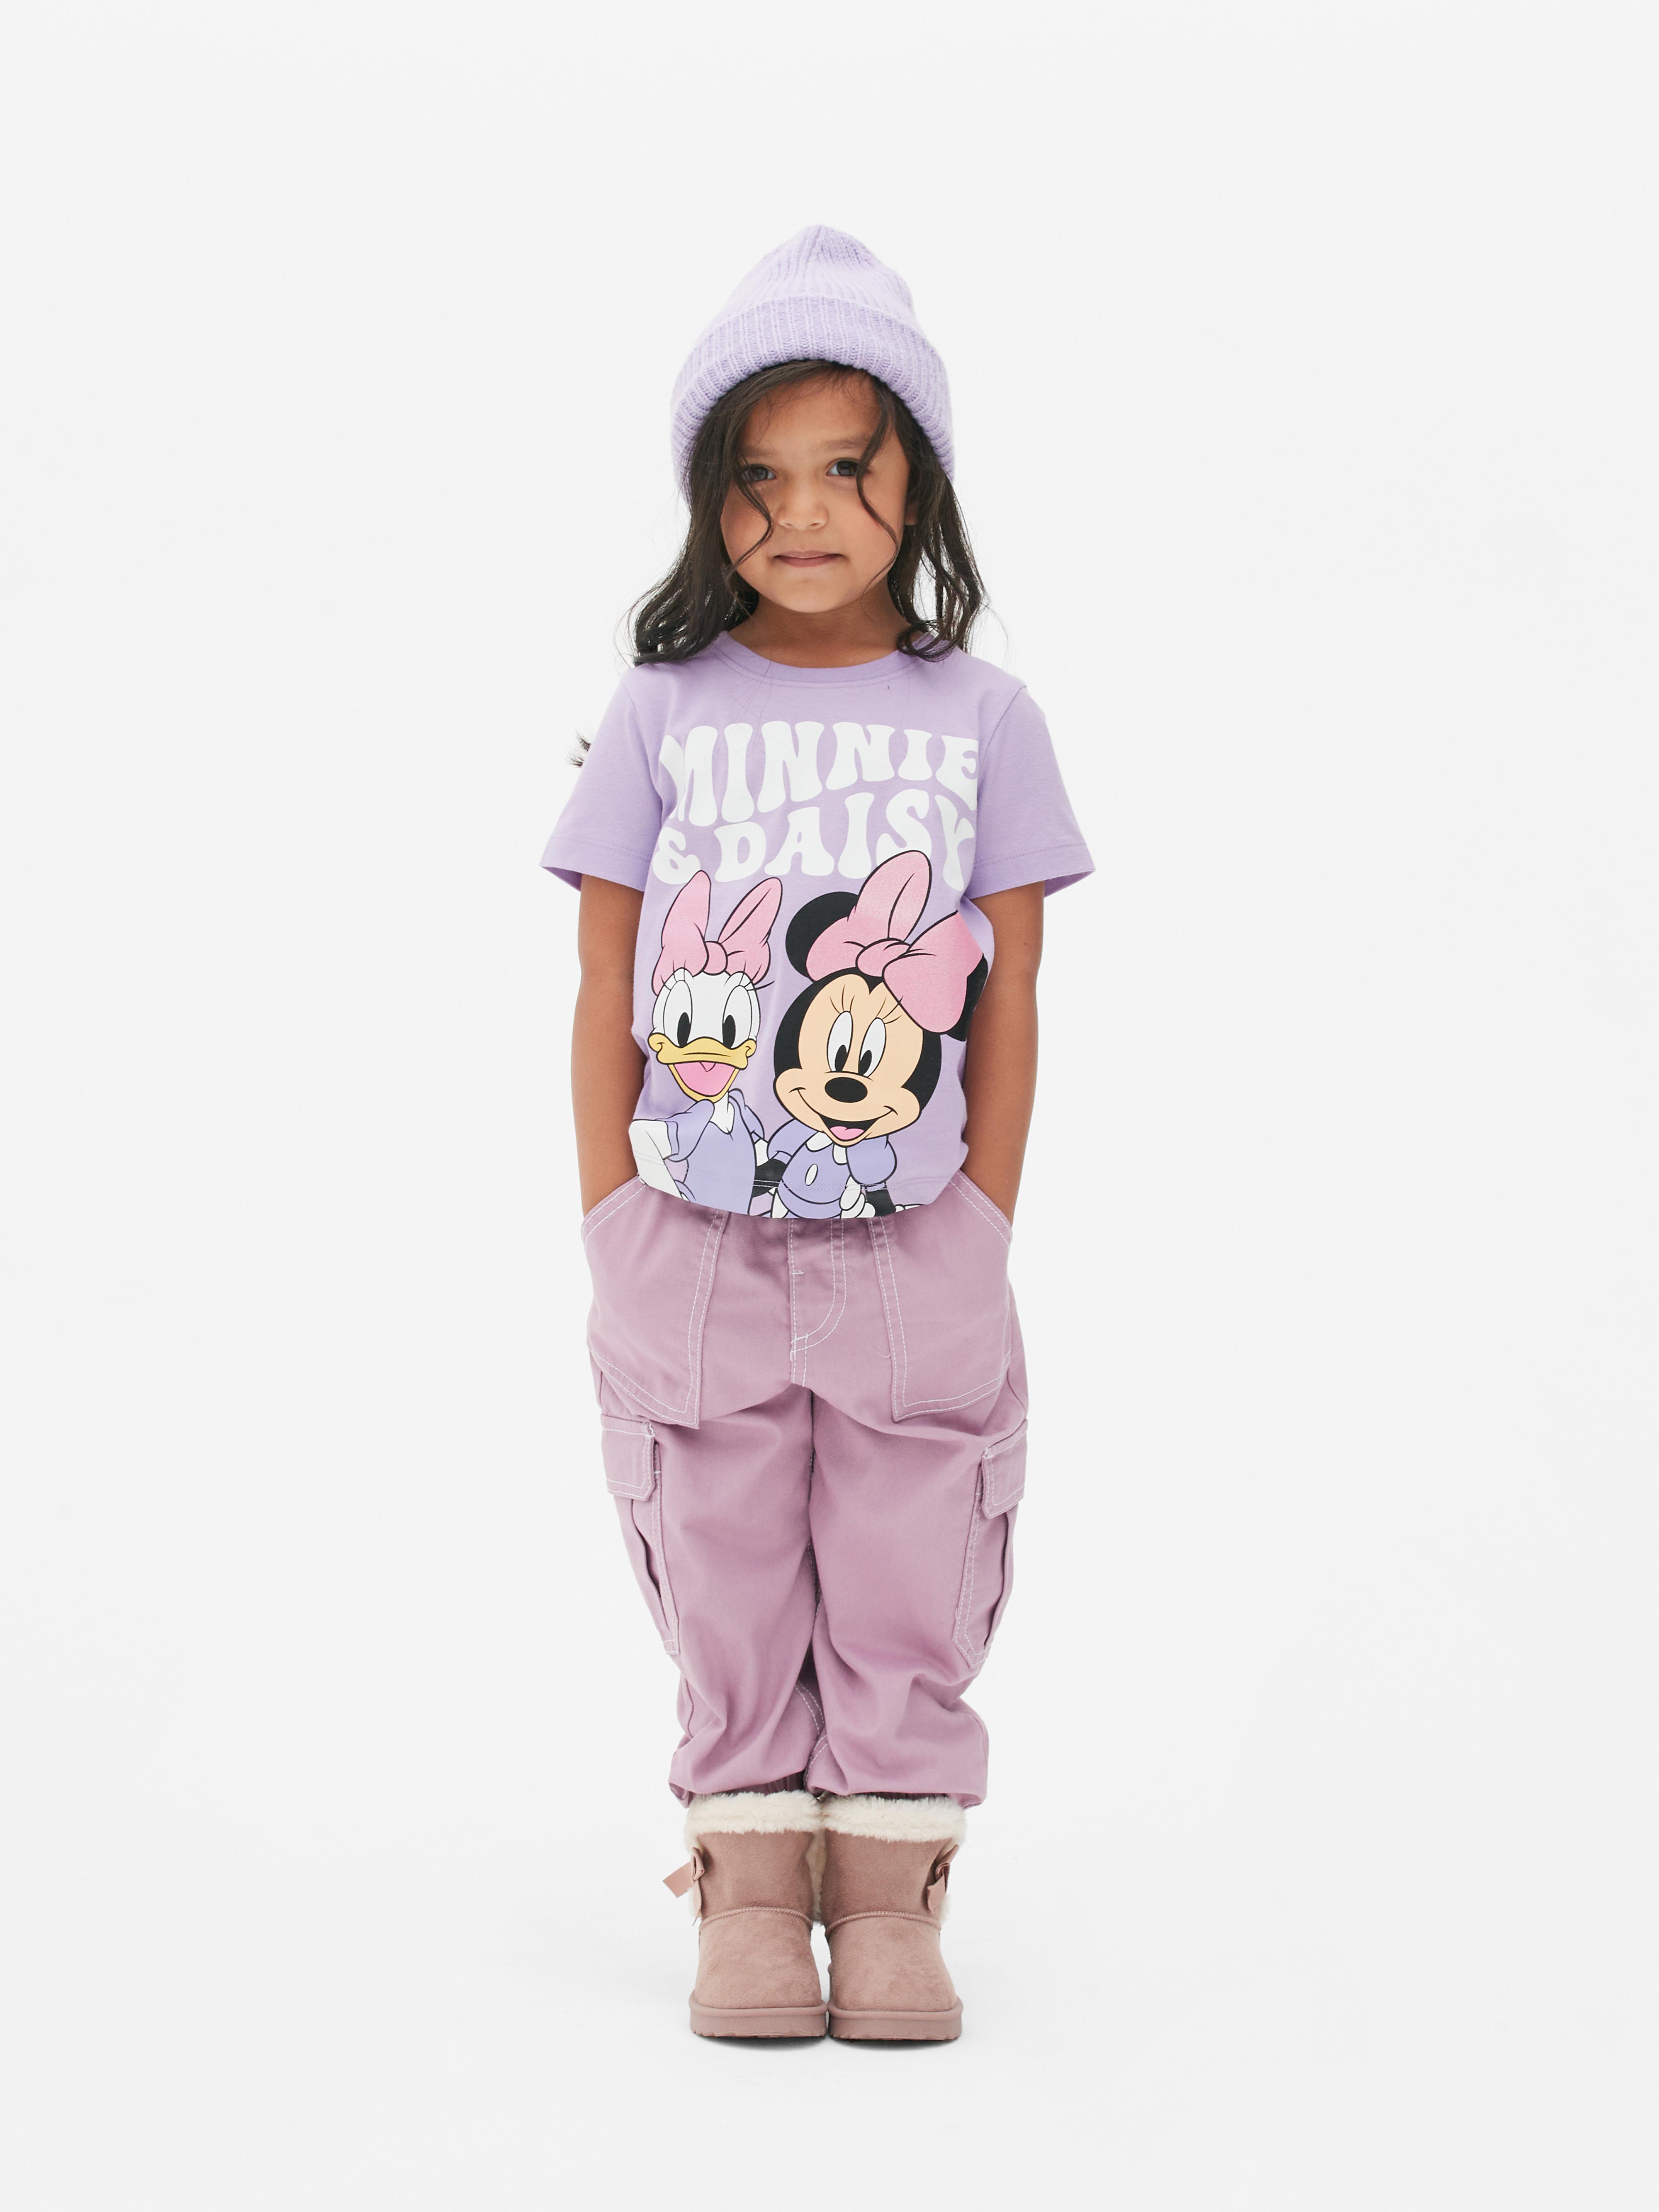 Disney’s Minnie Mouse and Daisy Duck T-Shirt